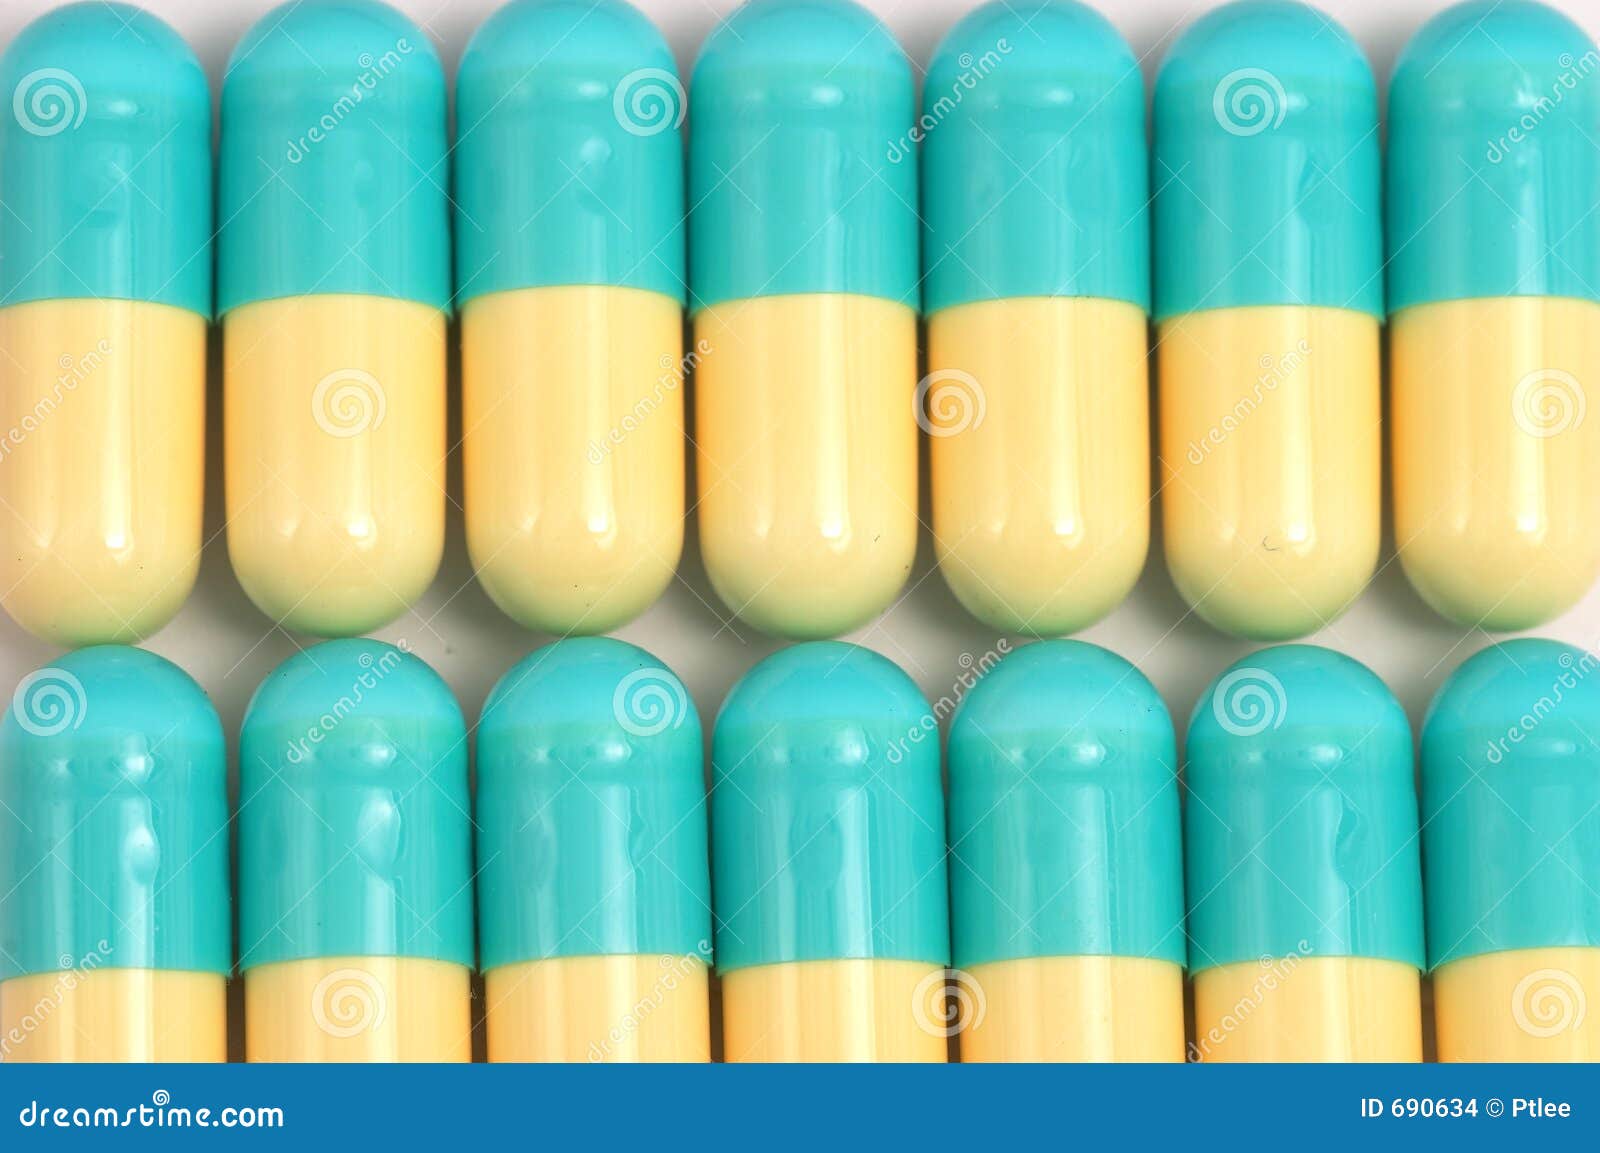 Blue Yellow Capsules Lined Up Stock Photo Image 690634